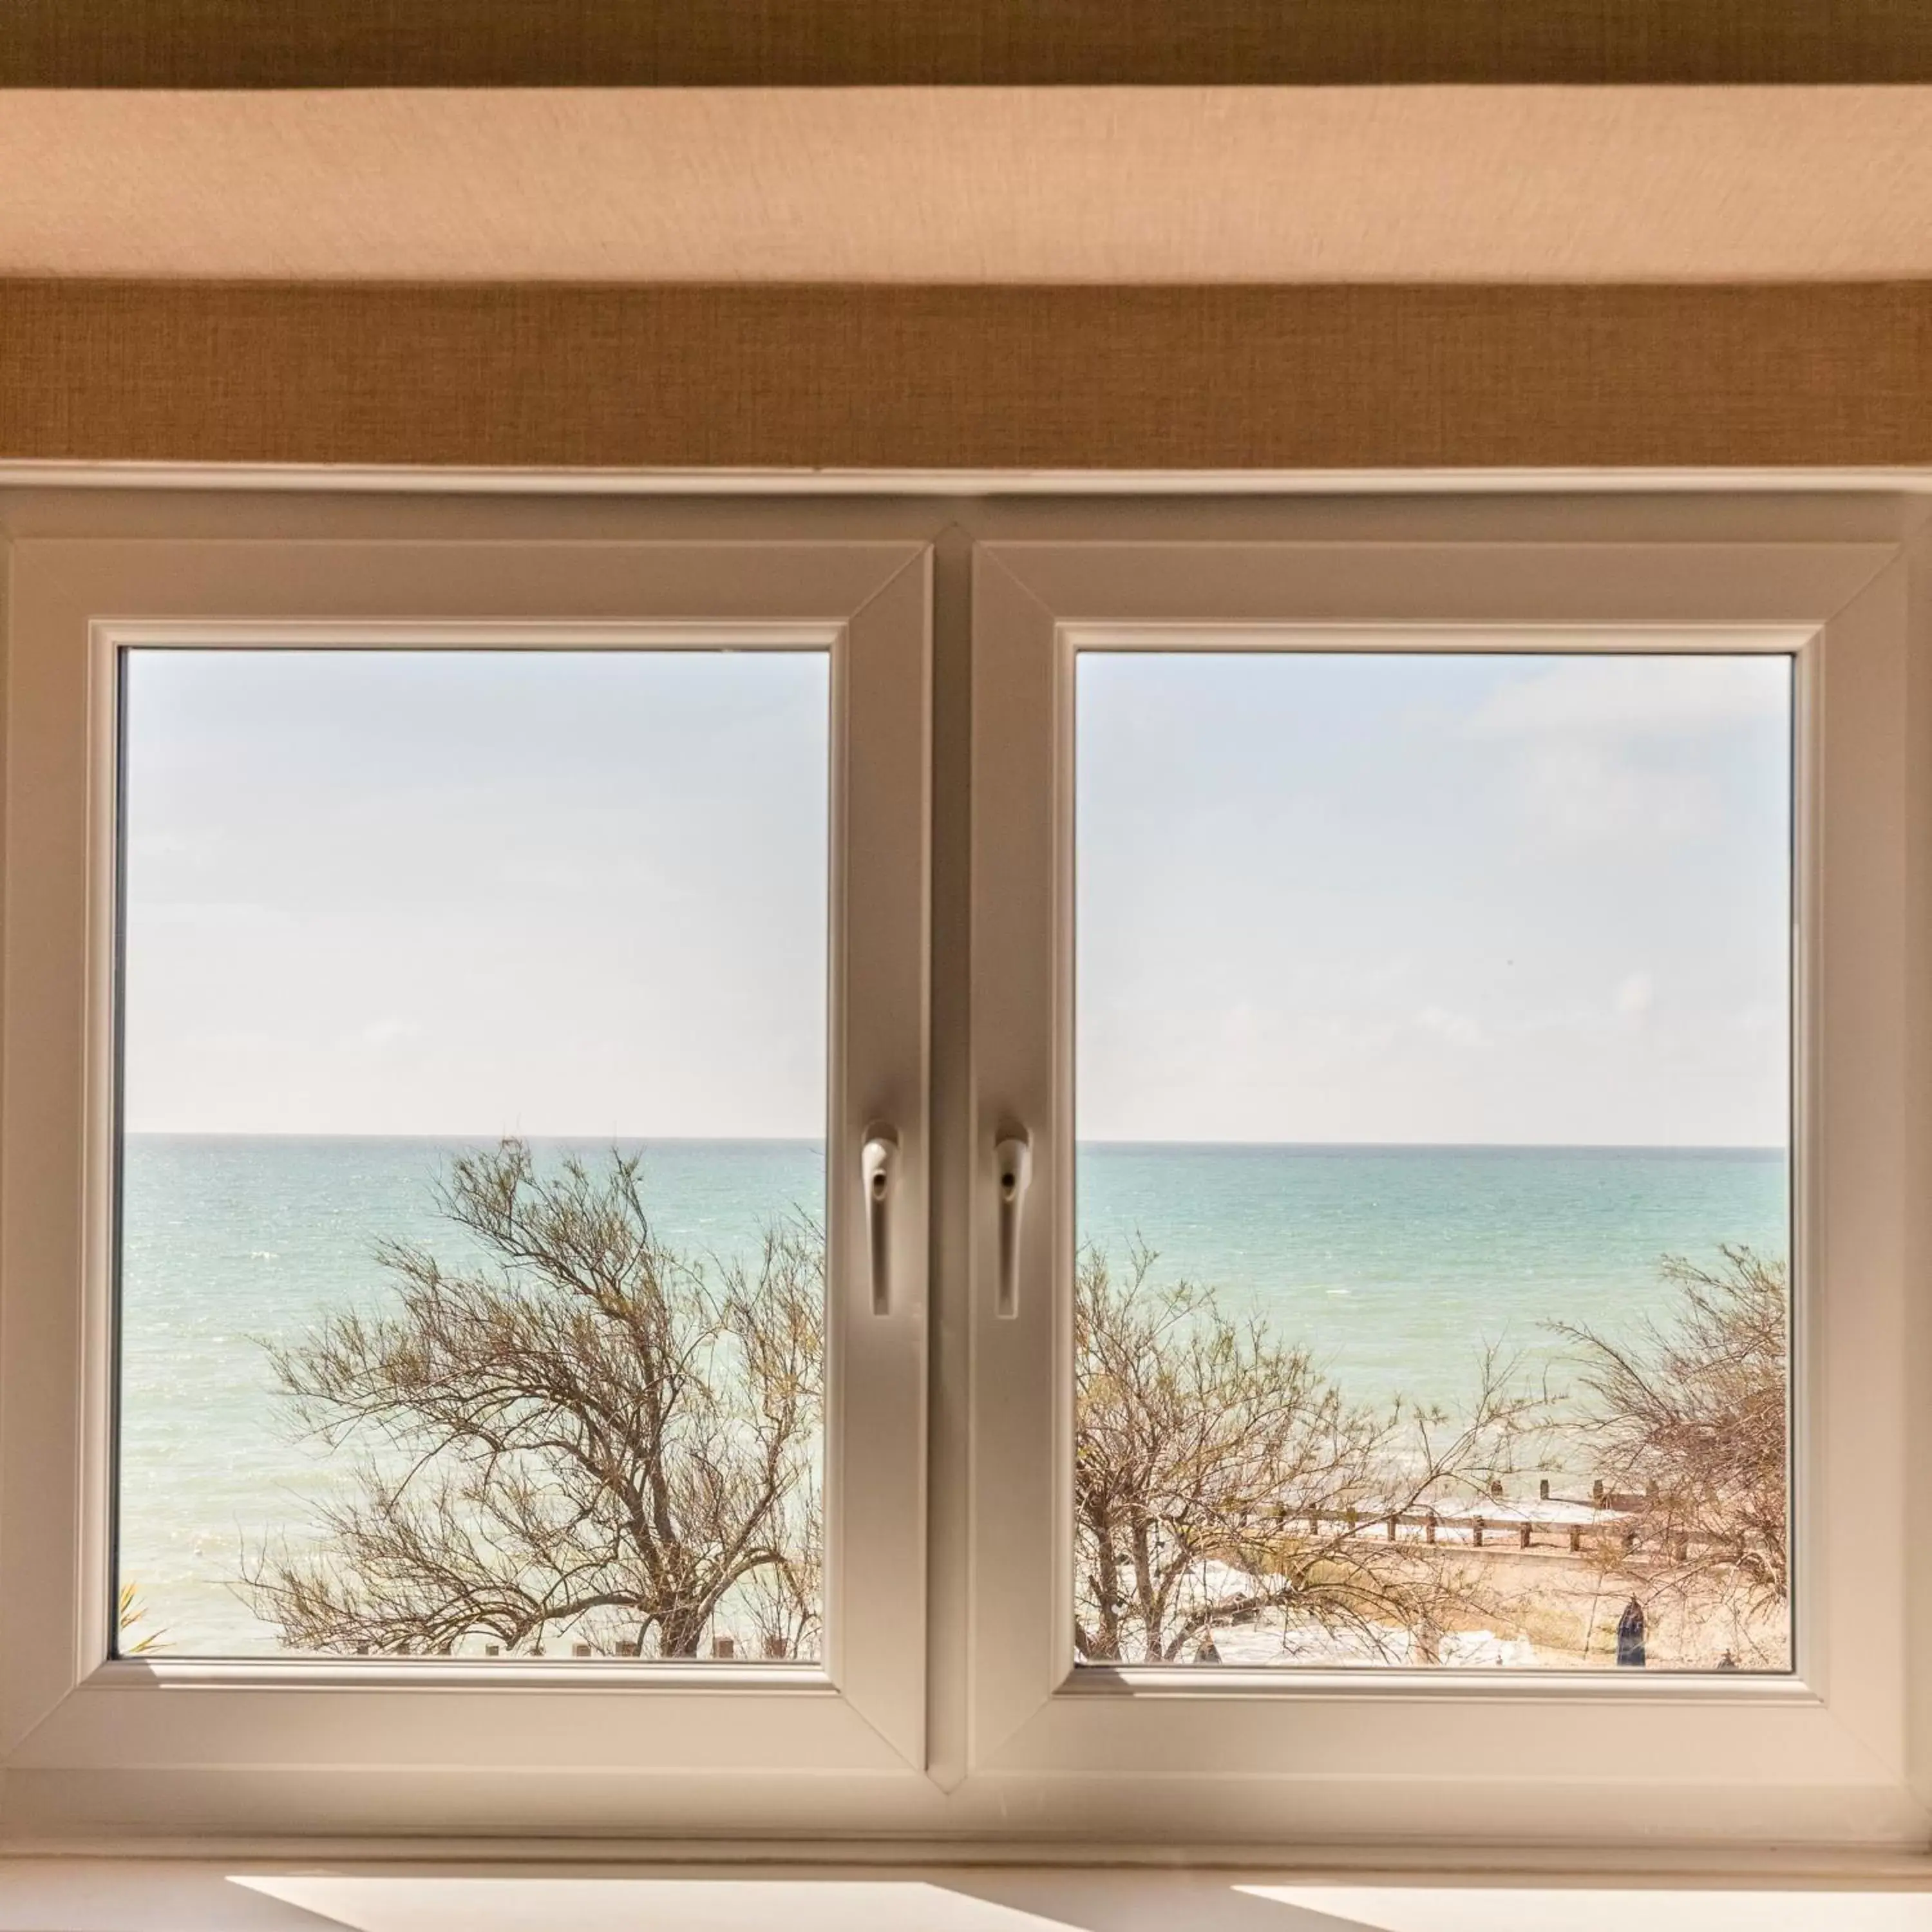 Sea view in The Beachcroft Hotel, BW Signature Collection